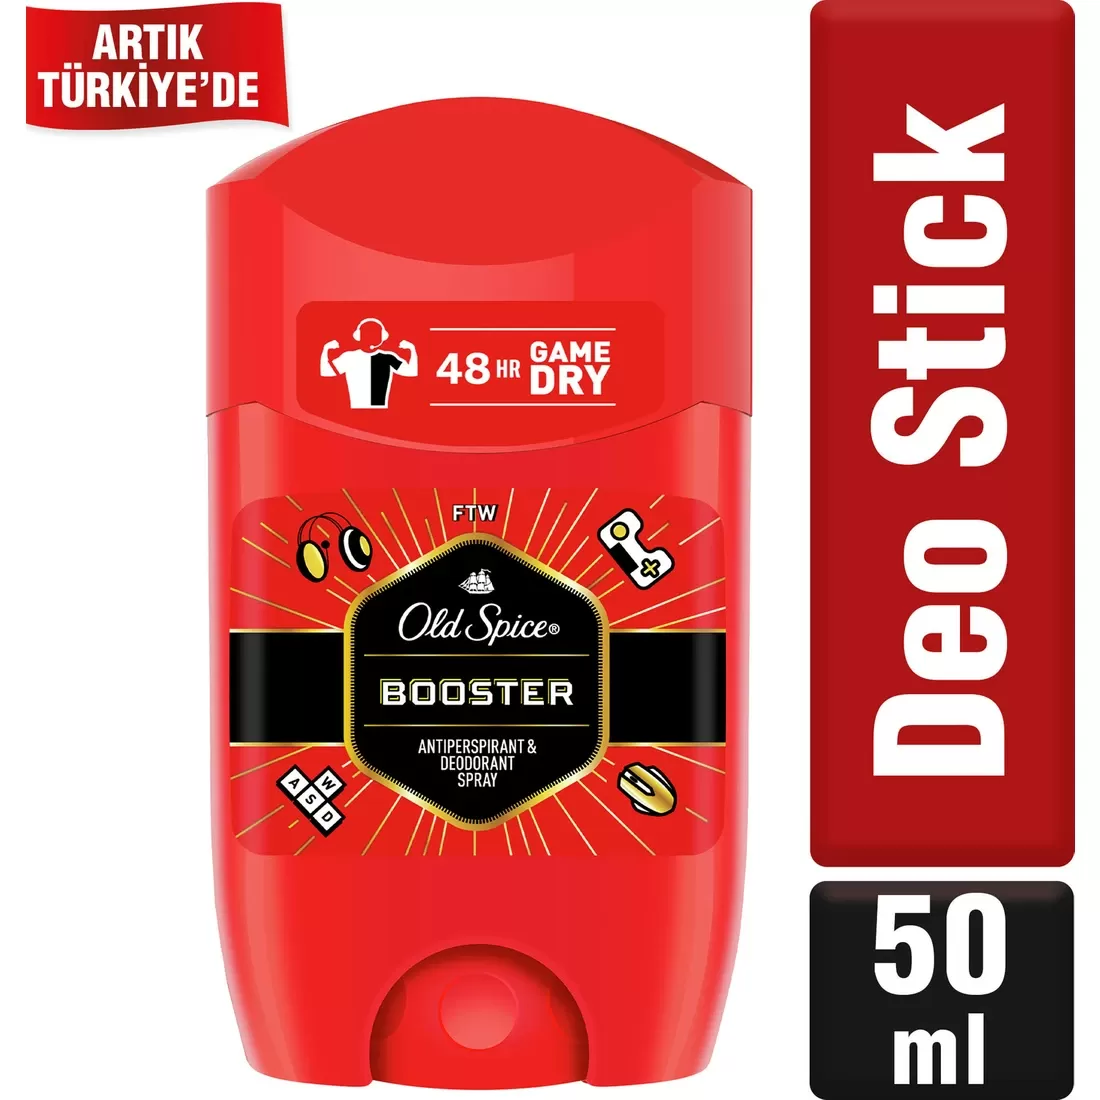 Old Spice Booster Stick Deodorant 50ml 6 Adet